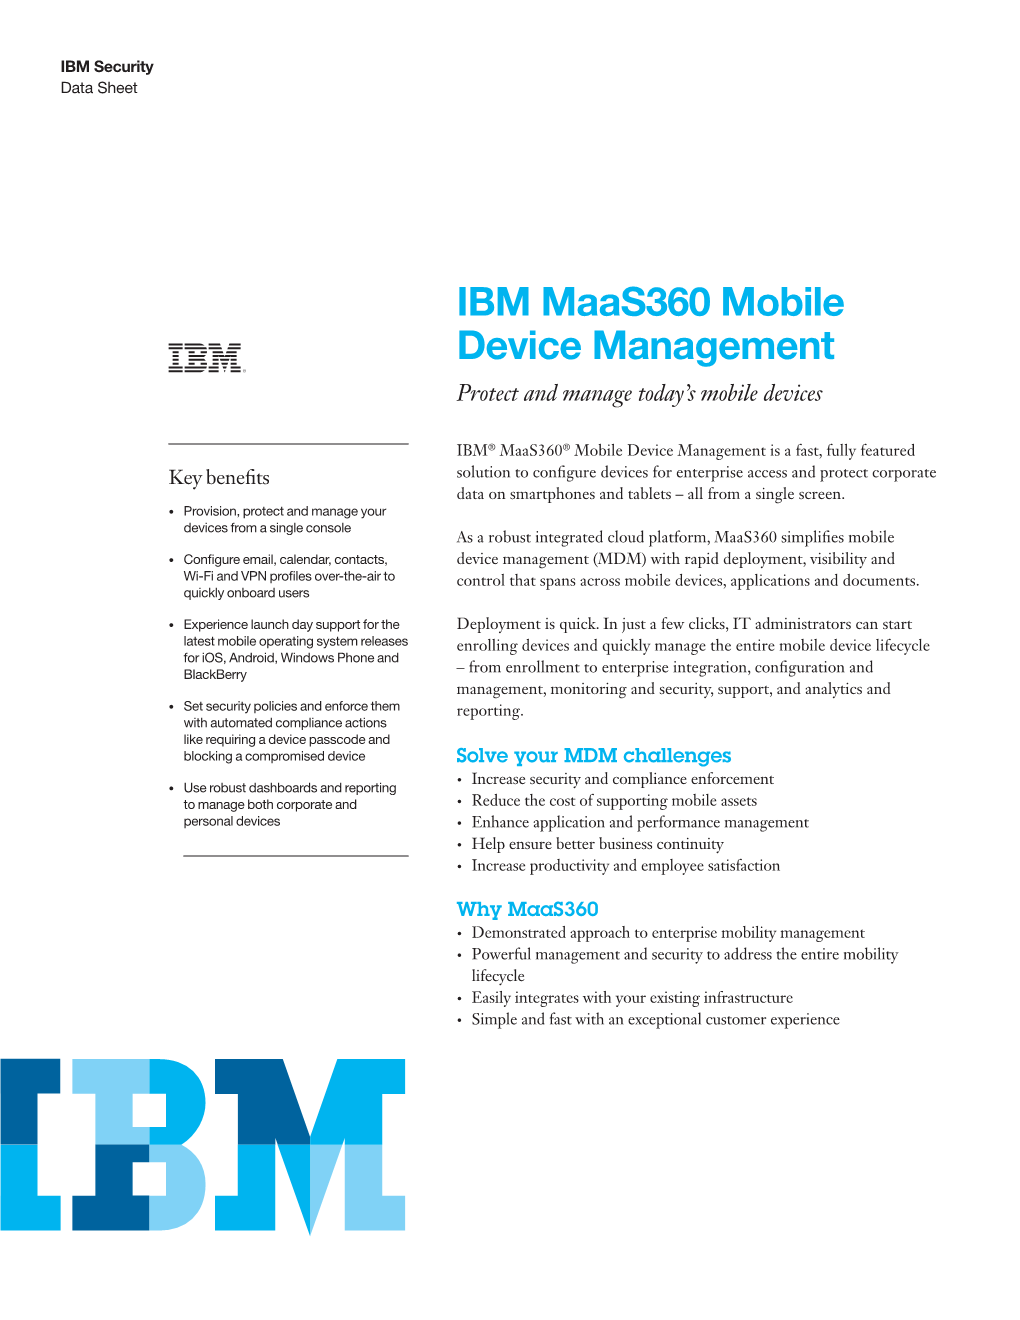 IBM Maas360 Mobile Device Management Protect and Manage Today’S Mobile Devices